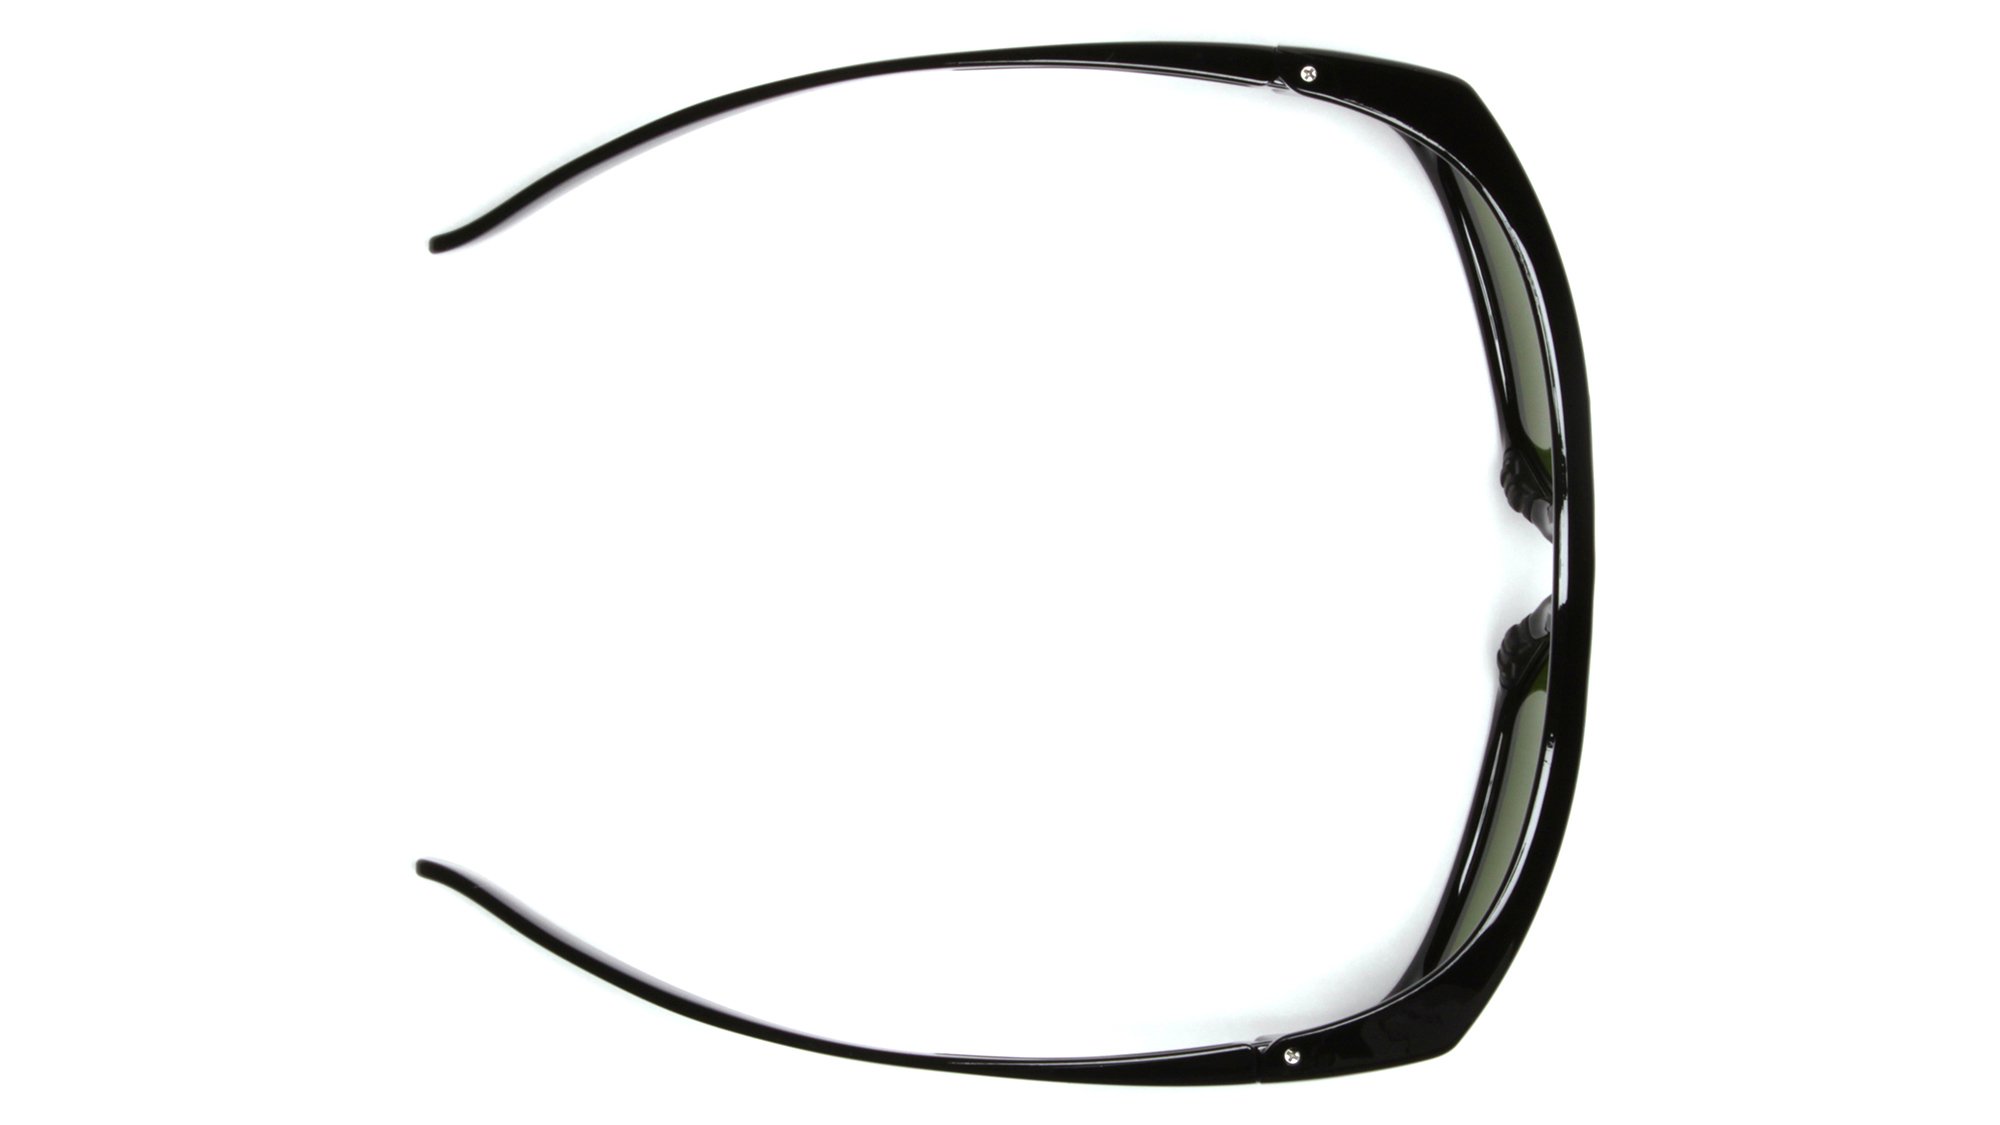 PYRAMEX SG7910D15 Pyramex Clear Safety Reader Glasses, Scratch-Resistant,Gray Frame